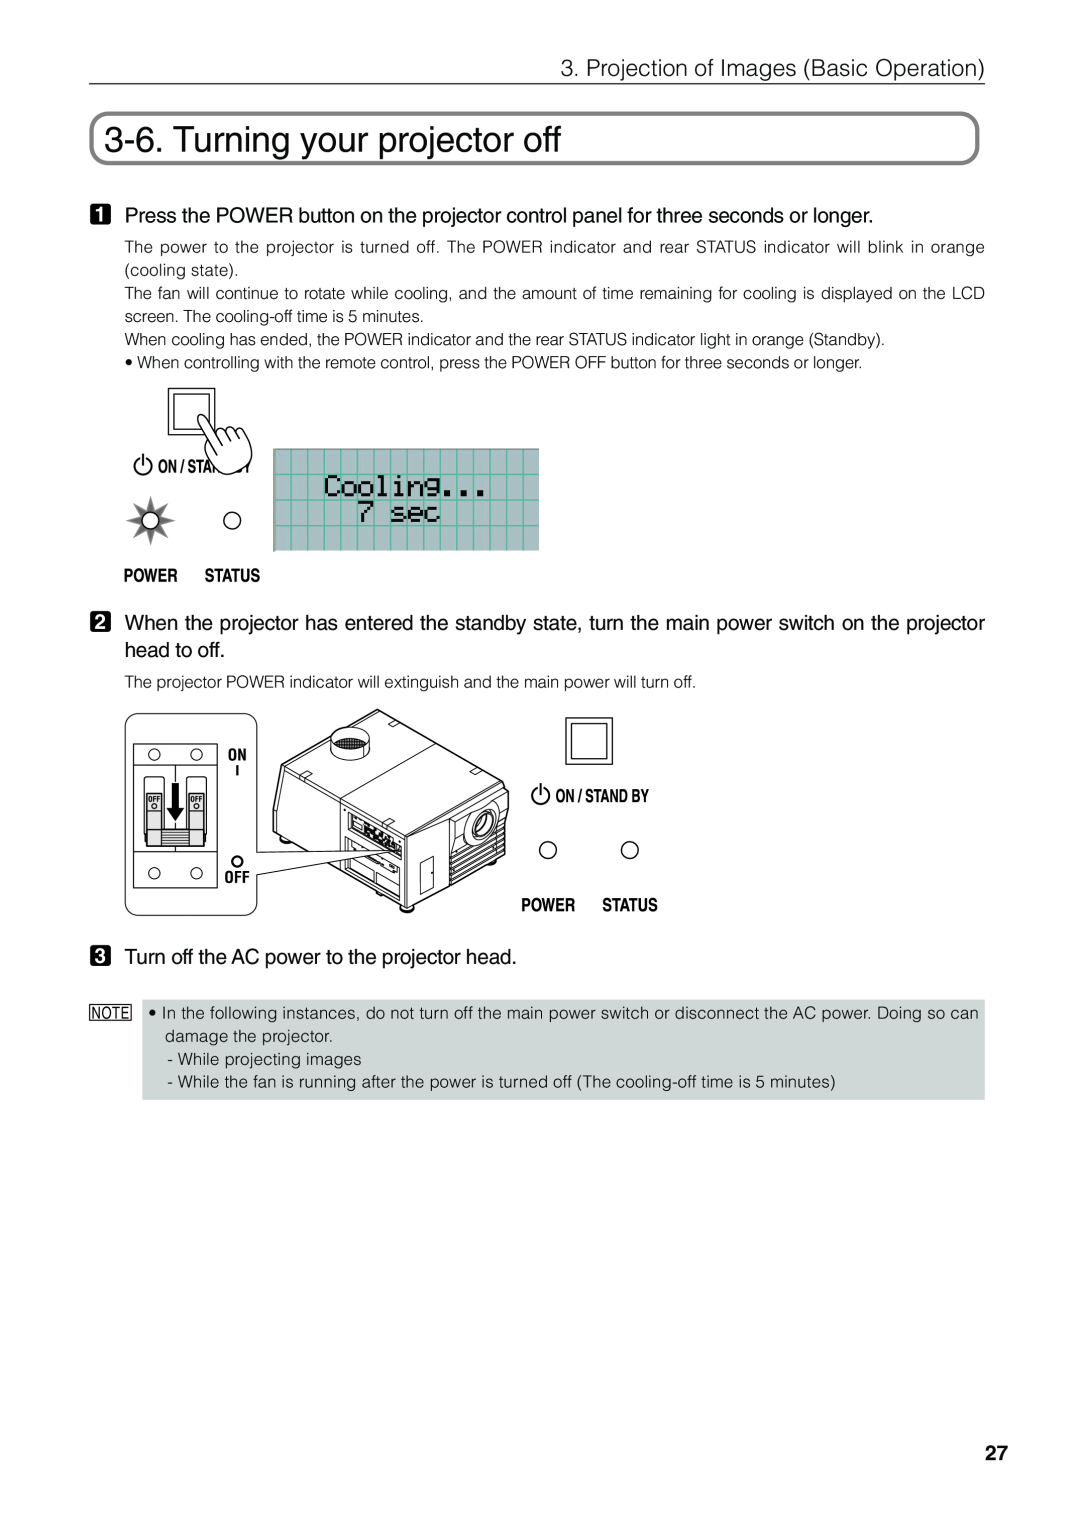 NEC NC1600C user manual Turning your projector off, Projection of Images Basic Operation 